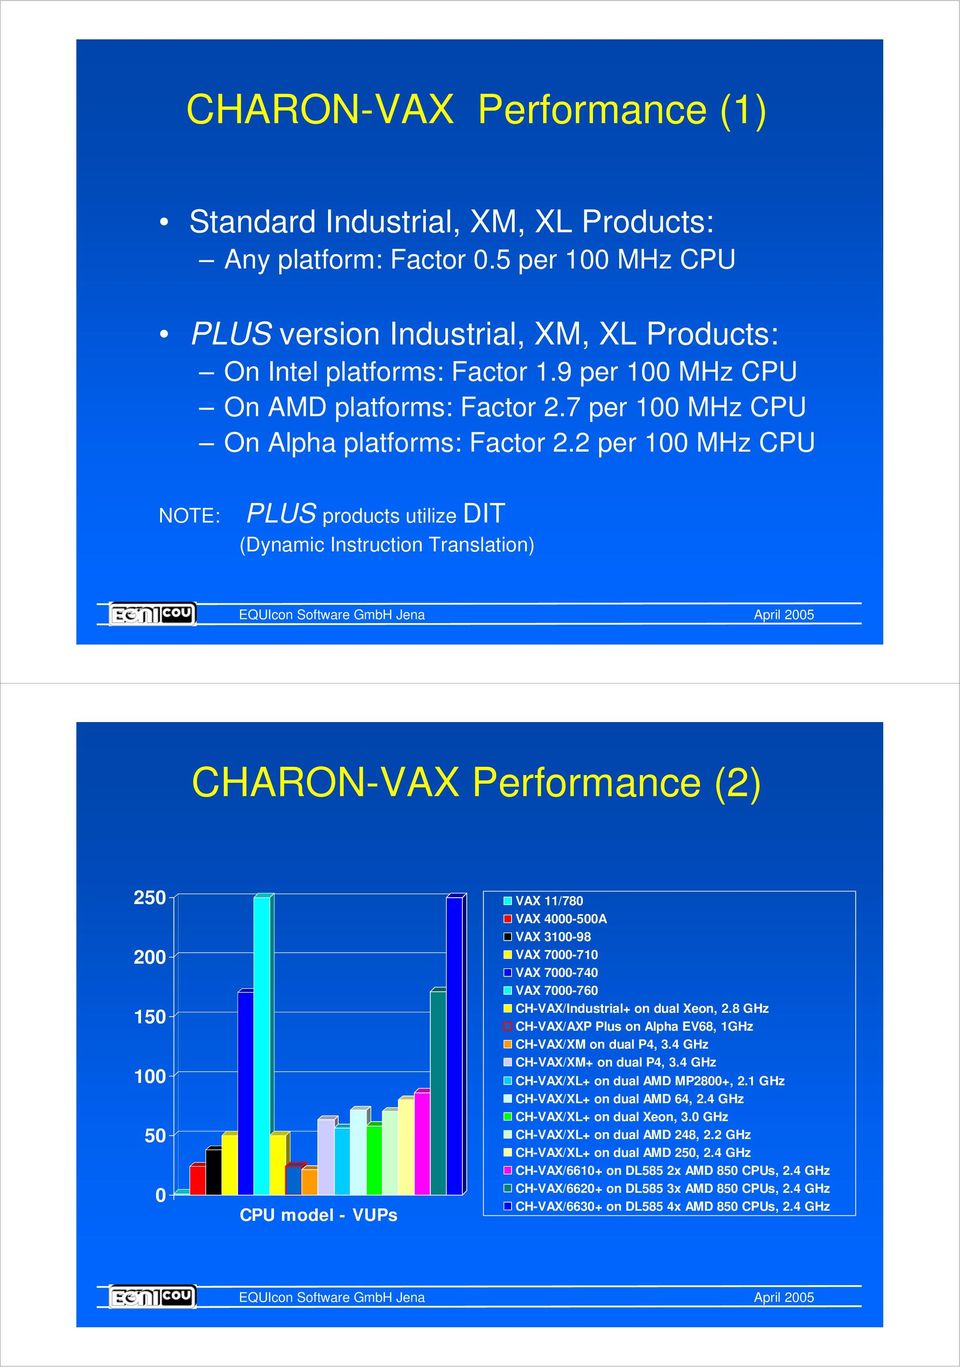 2 per 100 MHz CPU NOTE: PLUS products utilize DIT (Dynamic Instruction Translation) CHARON-VAX Performance (2) 250 200 150 100 50 0 CPU model - VUPs VAX 11/780 VAX 4000-500A VAX 3100-98 VAX 7000-710